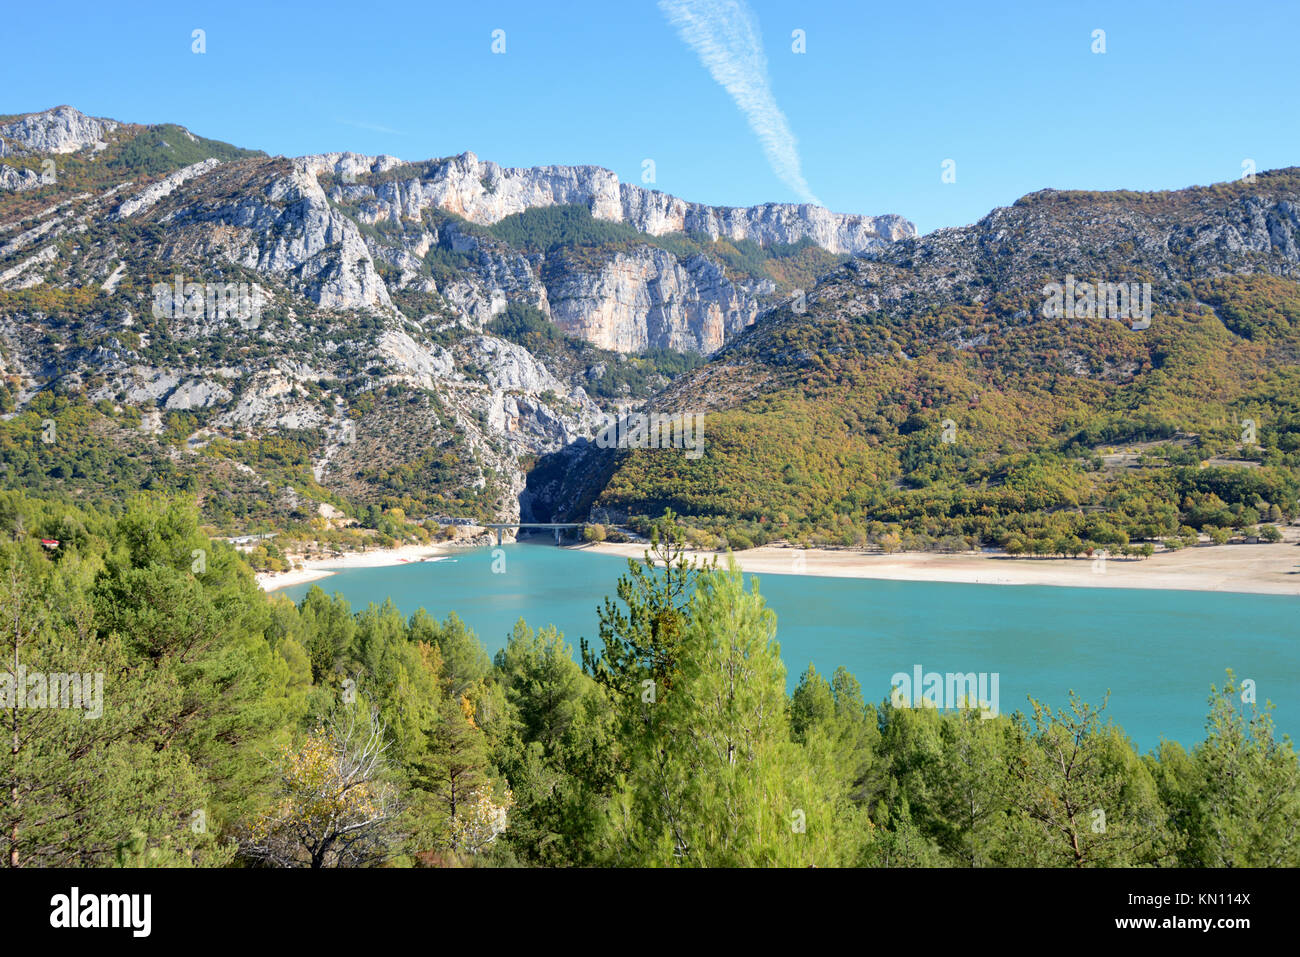 View of Lake Sainte-Croix, looking towards the Southern Entrance of the Verdon Gorge and lower Alps, Var/Alpes-de-Haute-Provence, Provence, France Stock Photo